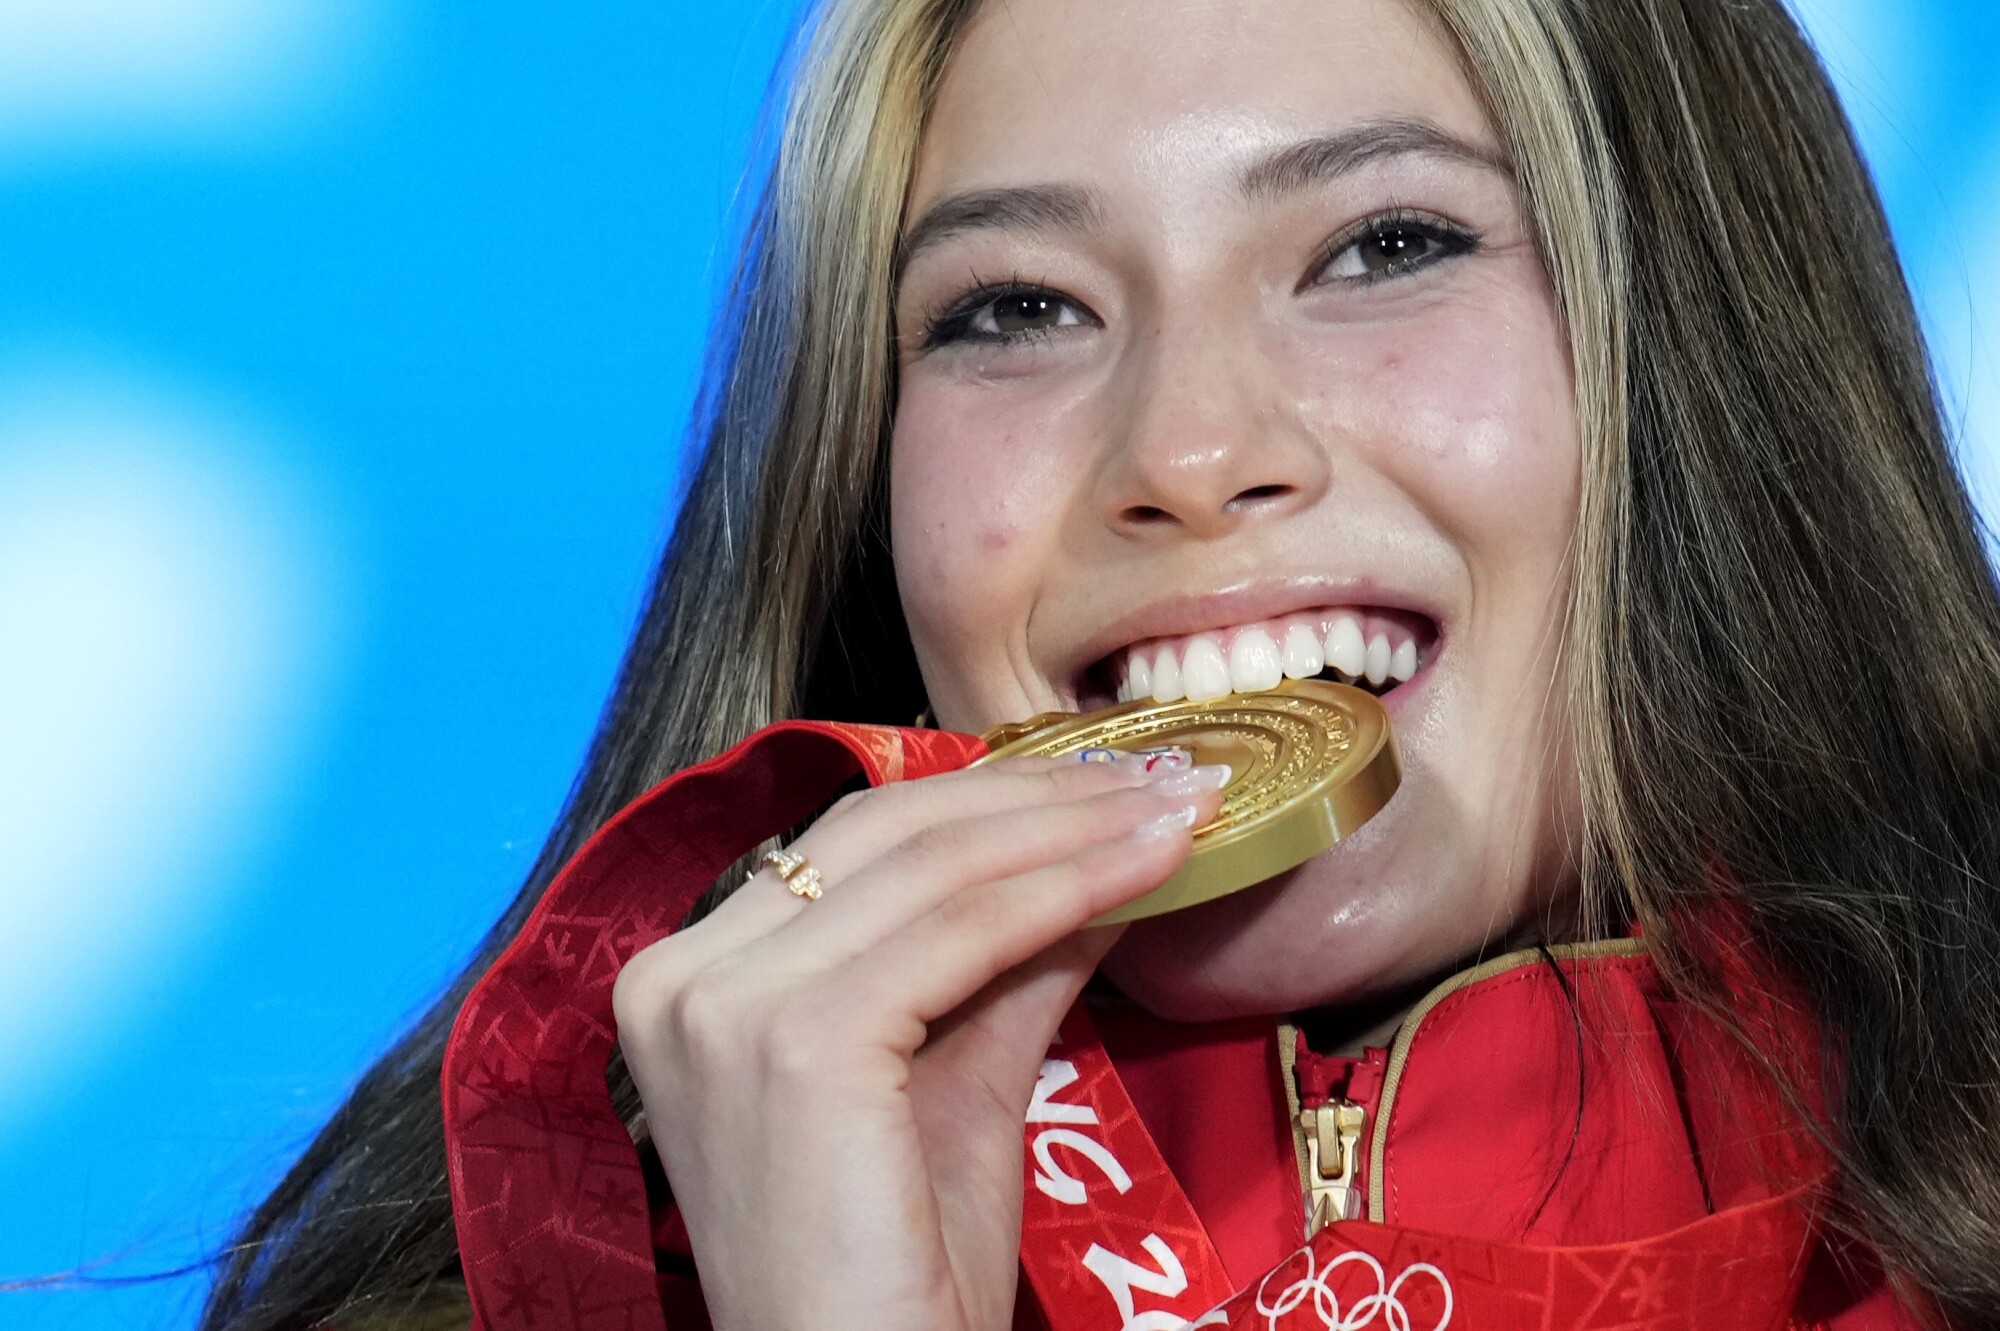 China freestyle skier Eileen Gu of China poses with her gold medal in her mouth.